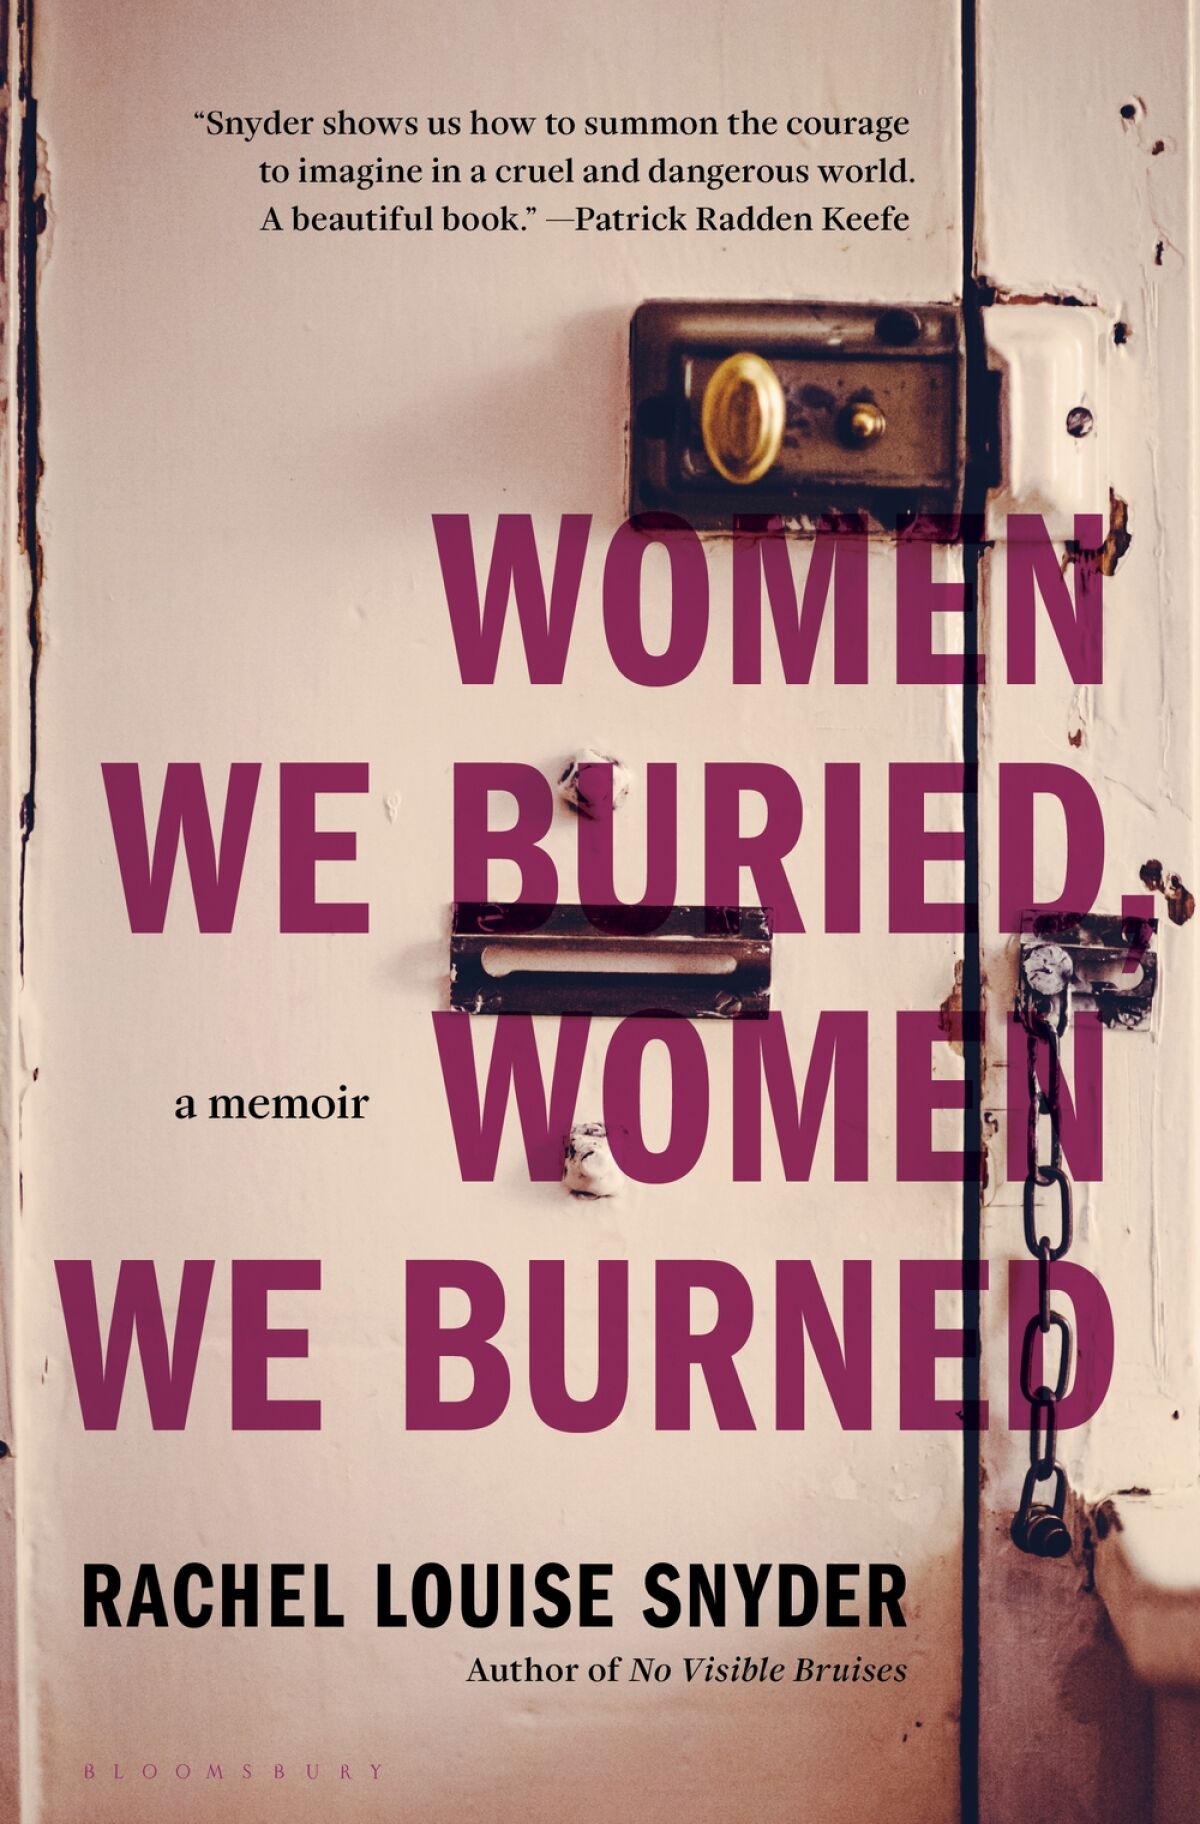 'Women We Buried, Women We Burned,' by Rachel Louise Snyder book cover has title printed on a door 